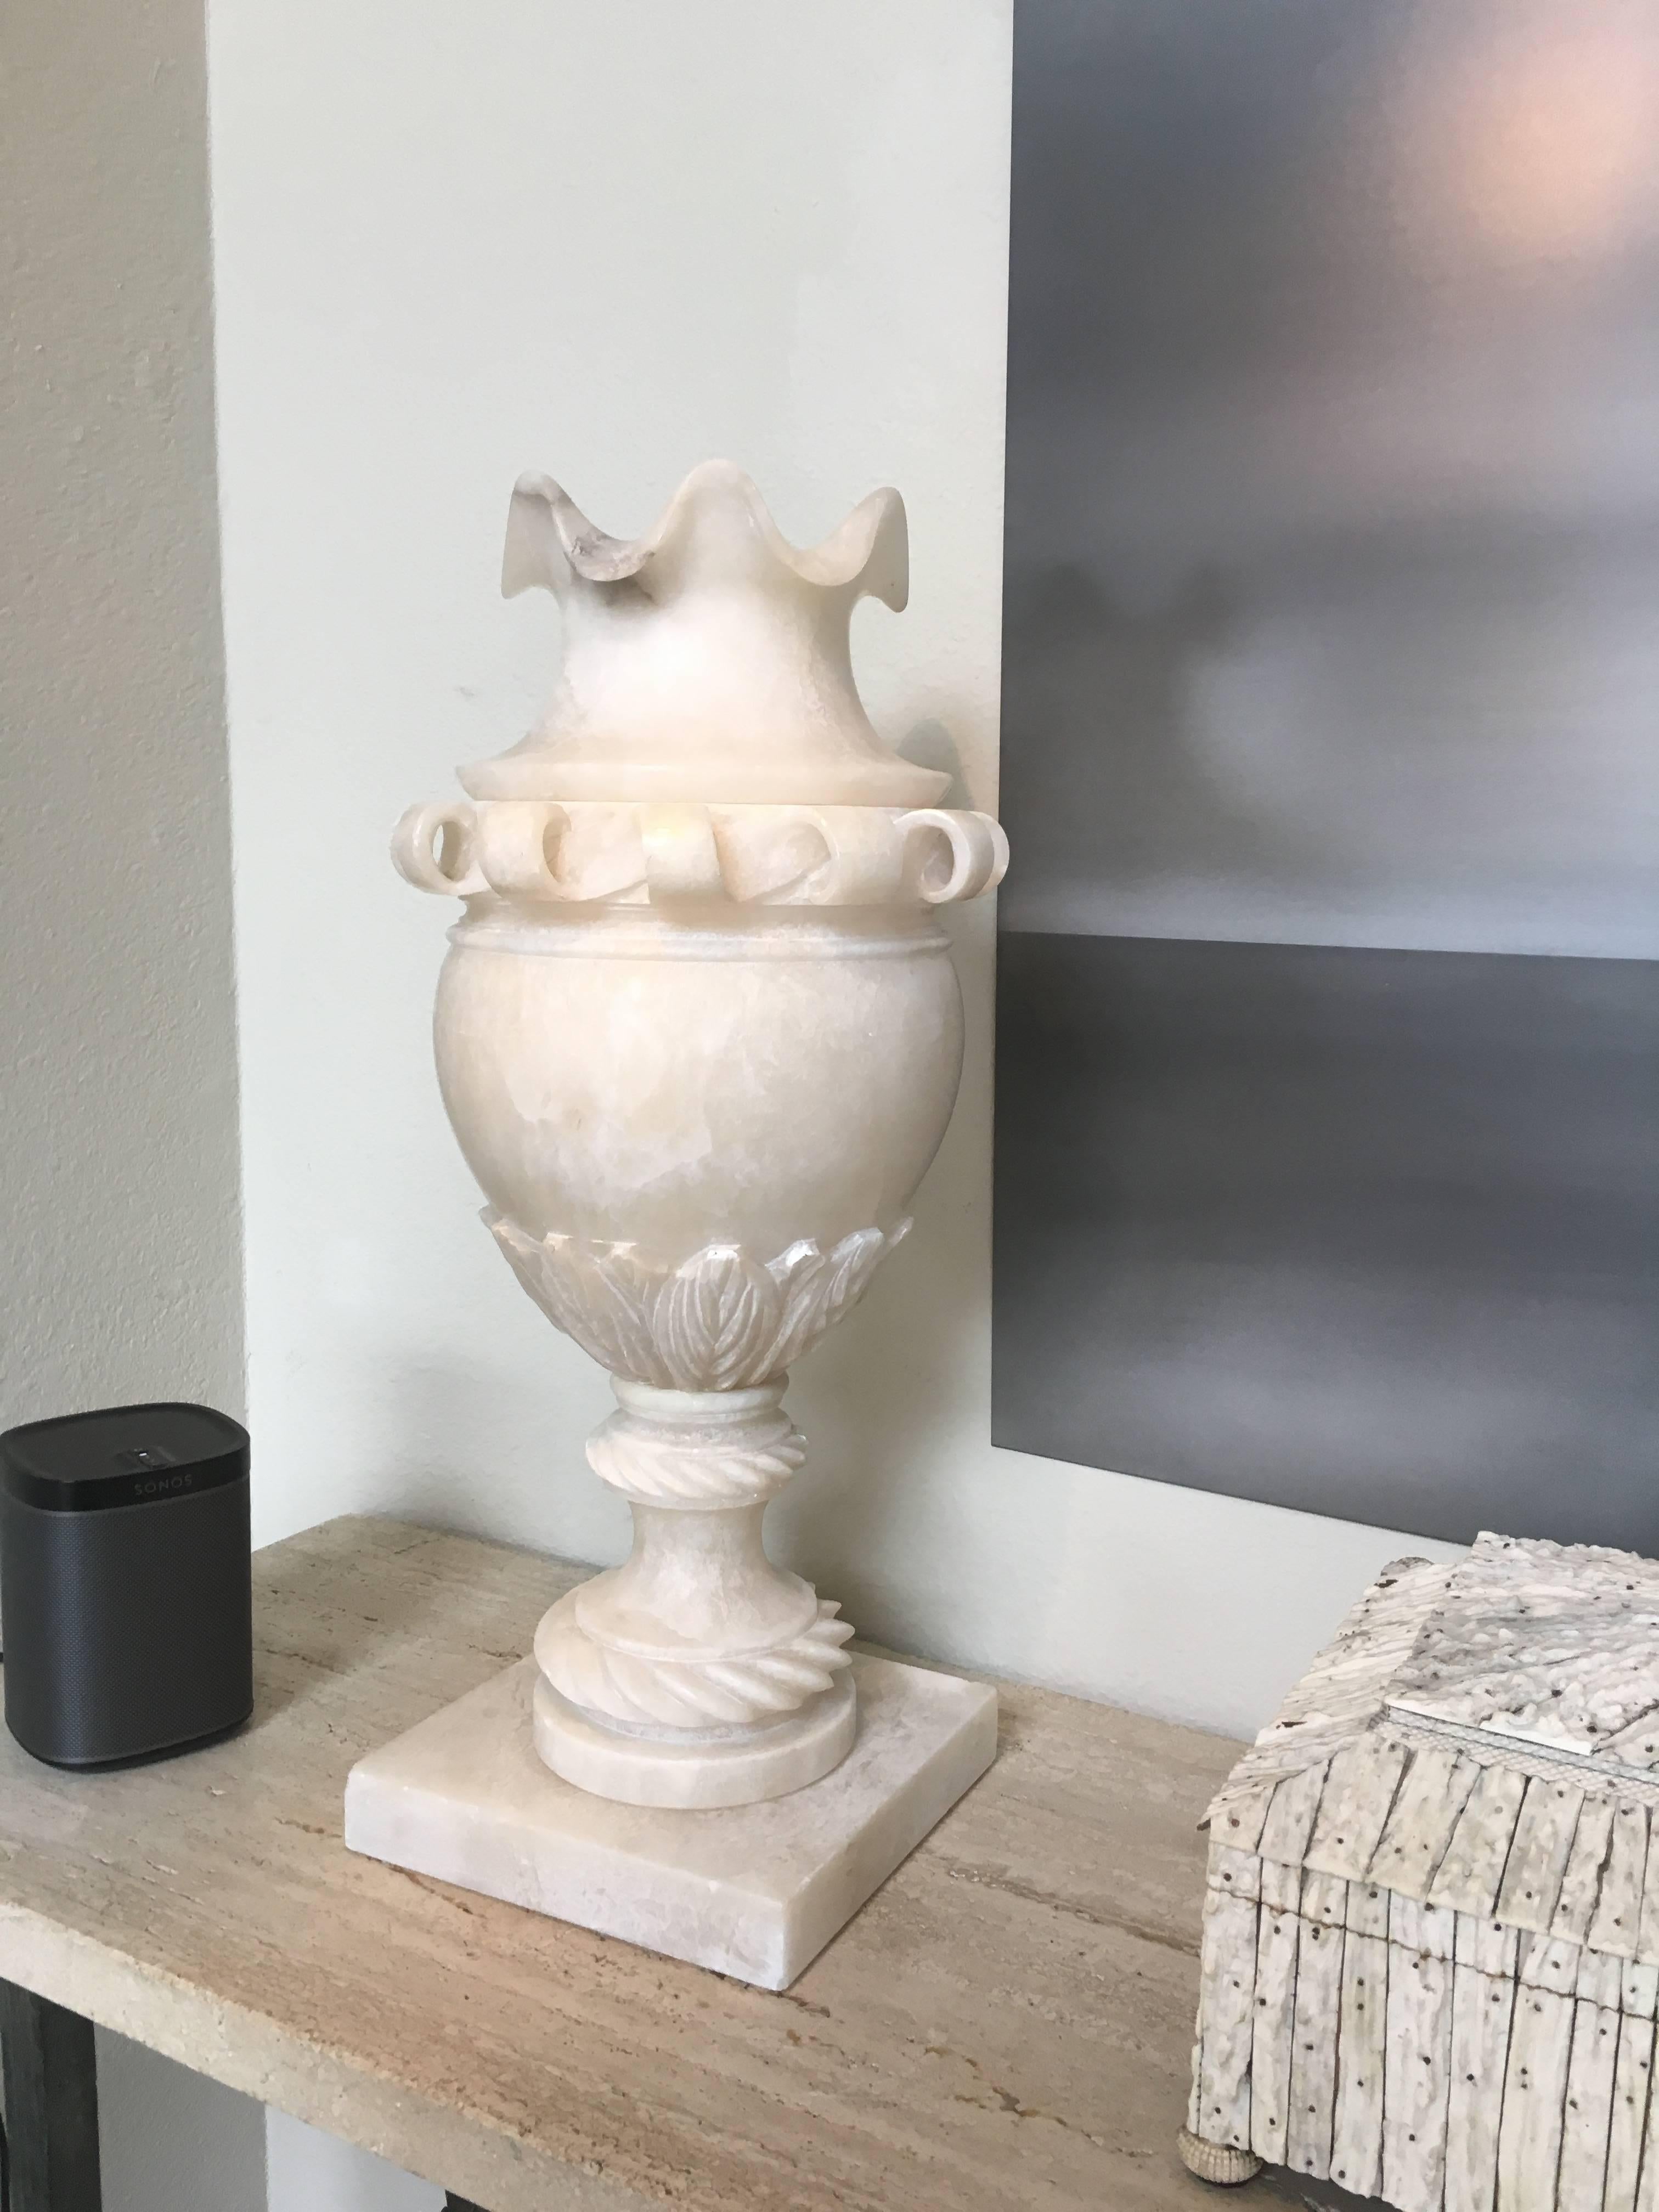 Turn of the century grand scale pure white marble classic form urn. This urn has scrolling ribbons around the top below a pie crust opening. The base features a twisted rope detailing with carved acanthus leaves, the whole raised on a square